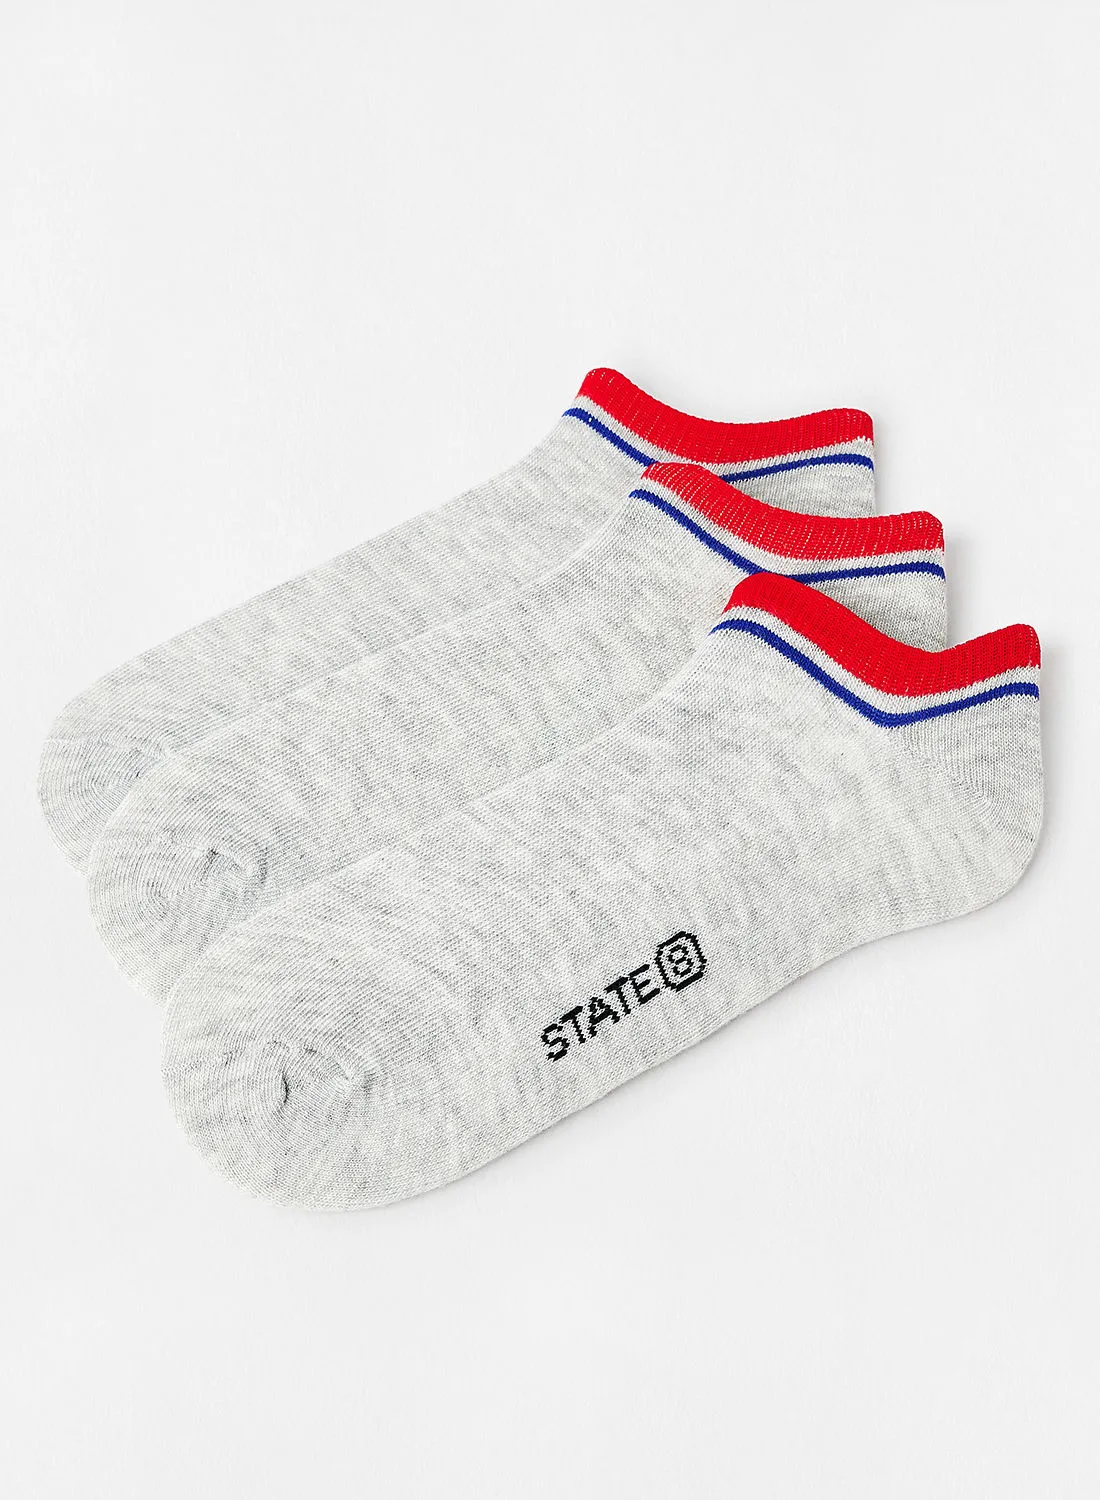 STATE 8 Contrast Ankle Socks (Pack of 3) Grey/Red